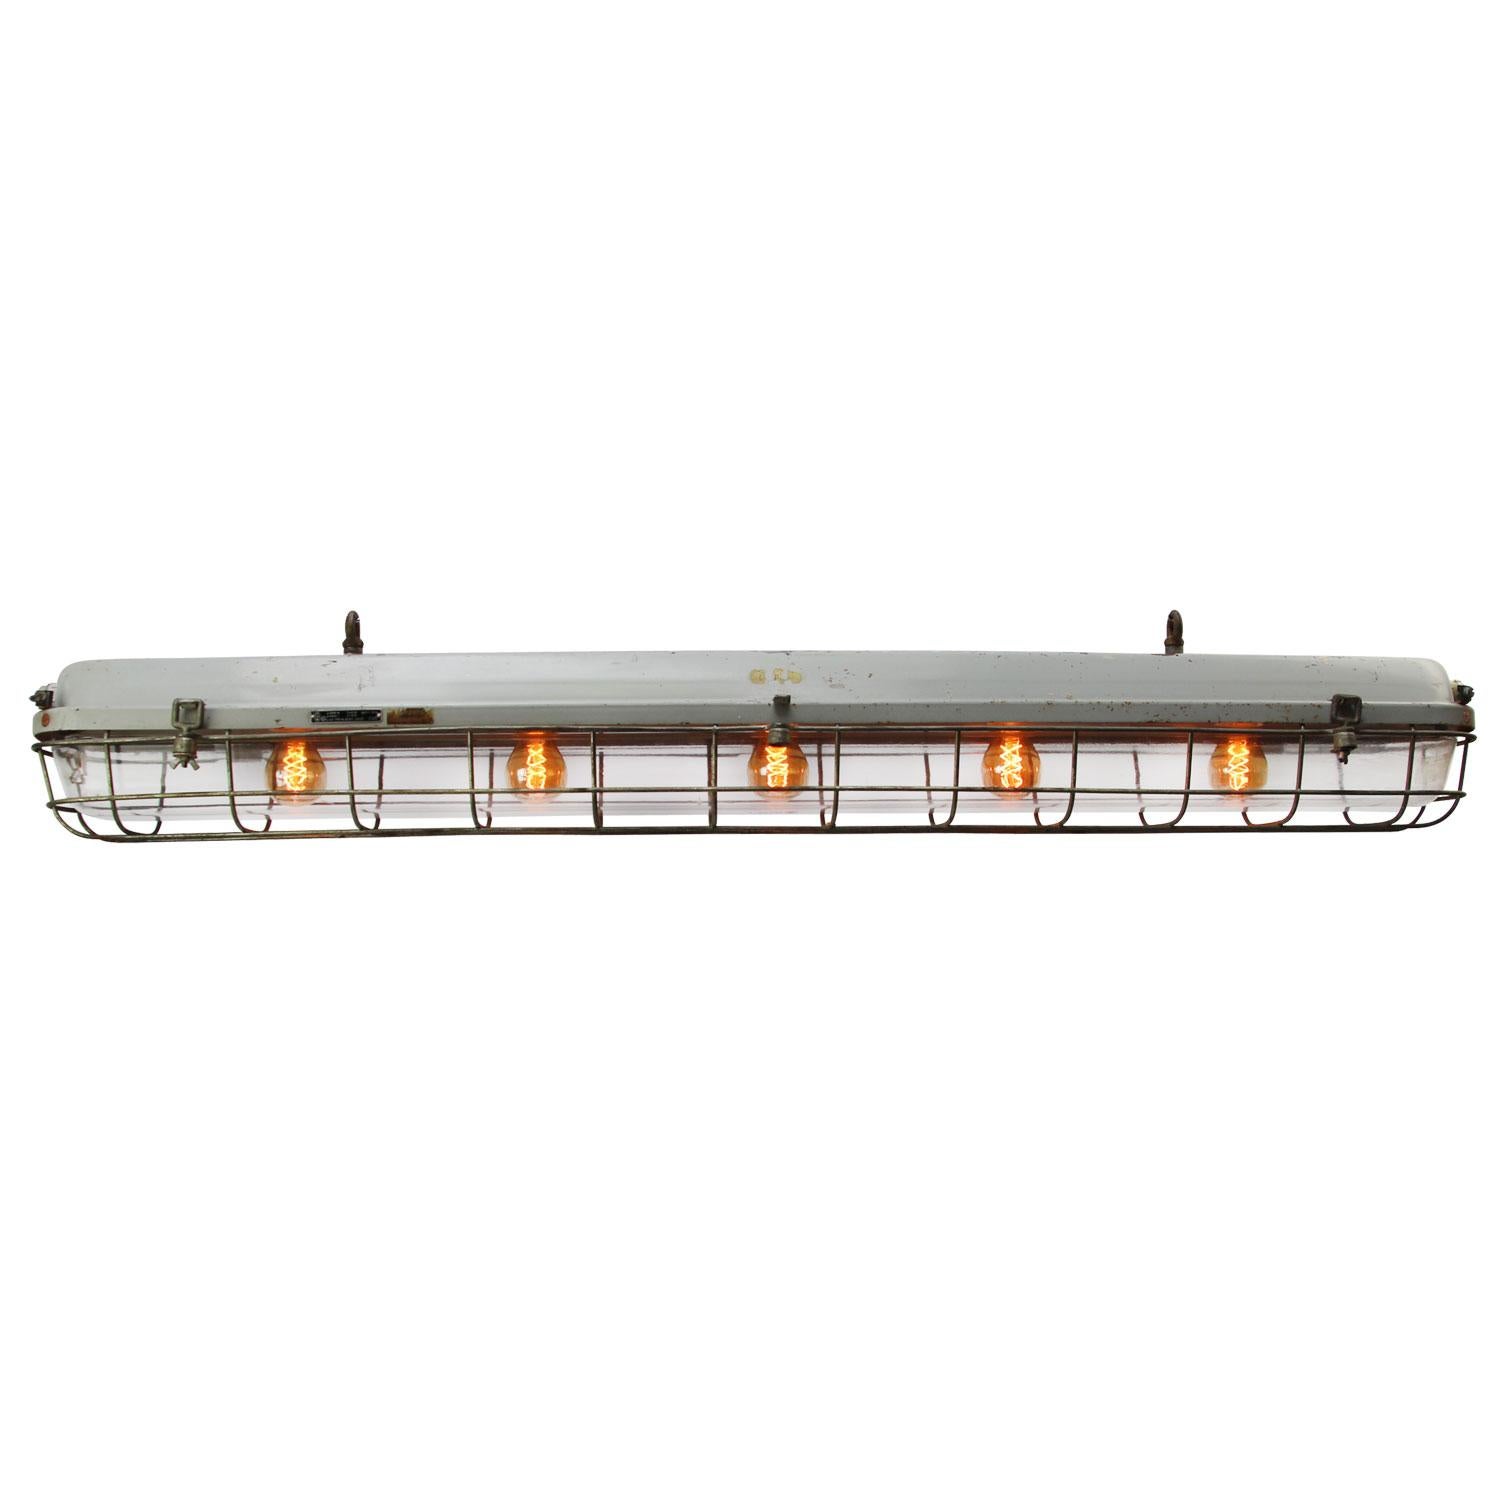 Industrial metal light. Clear plastic cover

Suitable for 5-light bulbs E27/ E26

Weight: 10.50 kg / 23.1 lb

Priced per individual item. All lamps have been made suitable by international standards for incandescent light bulbs,